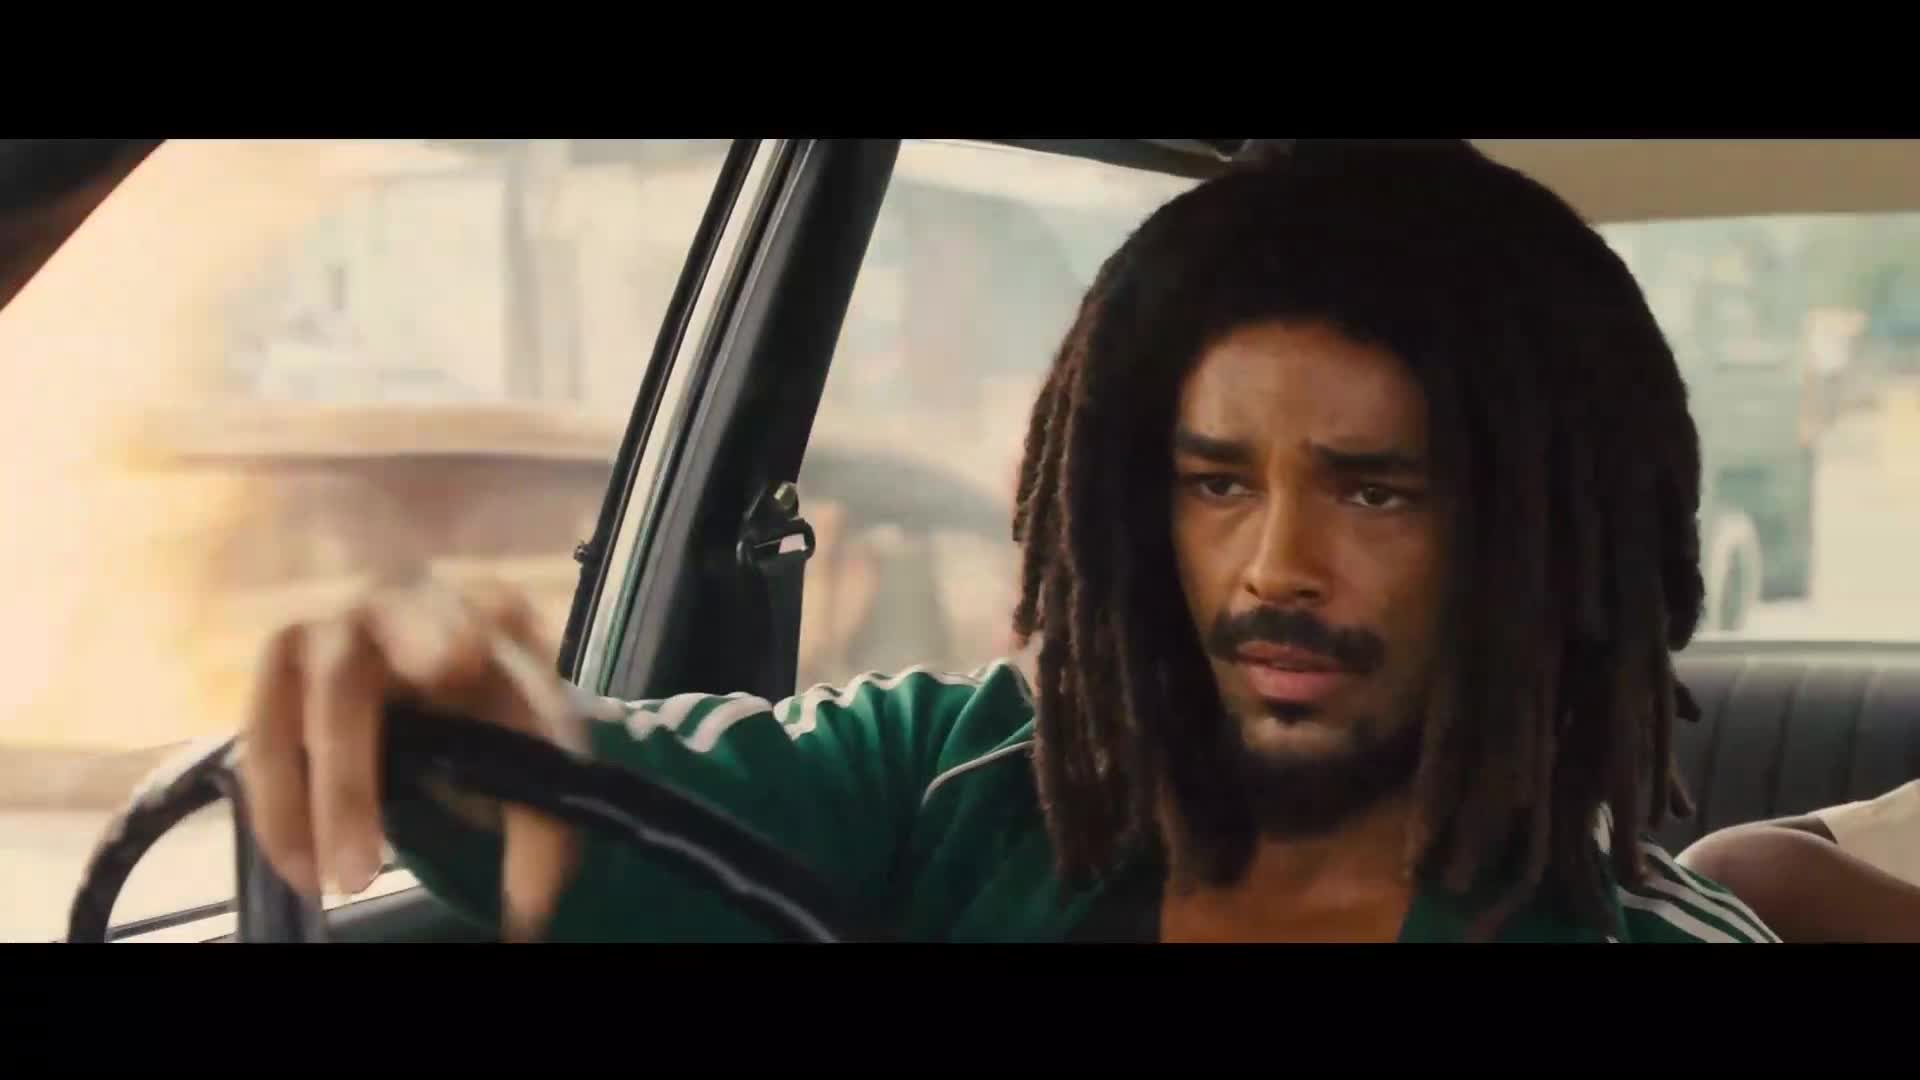 Bob Marley ‘One Love’ Hits $80M in Opening Weekend